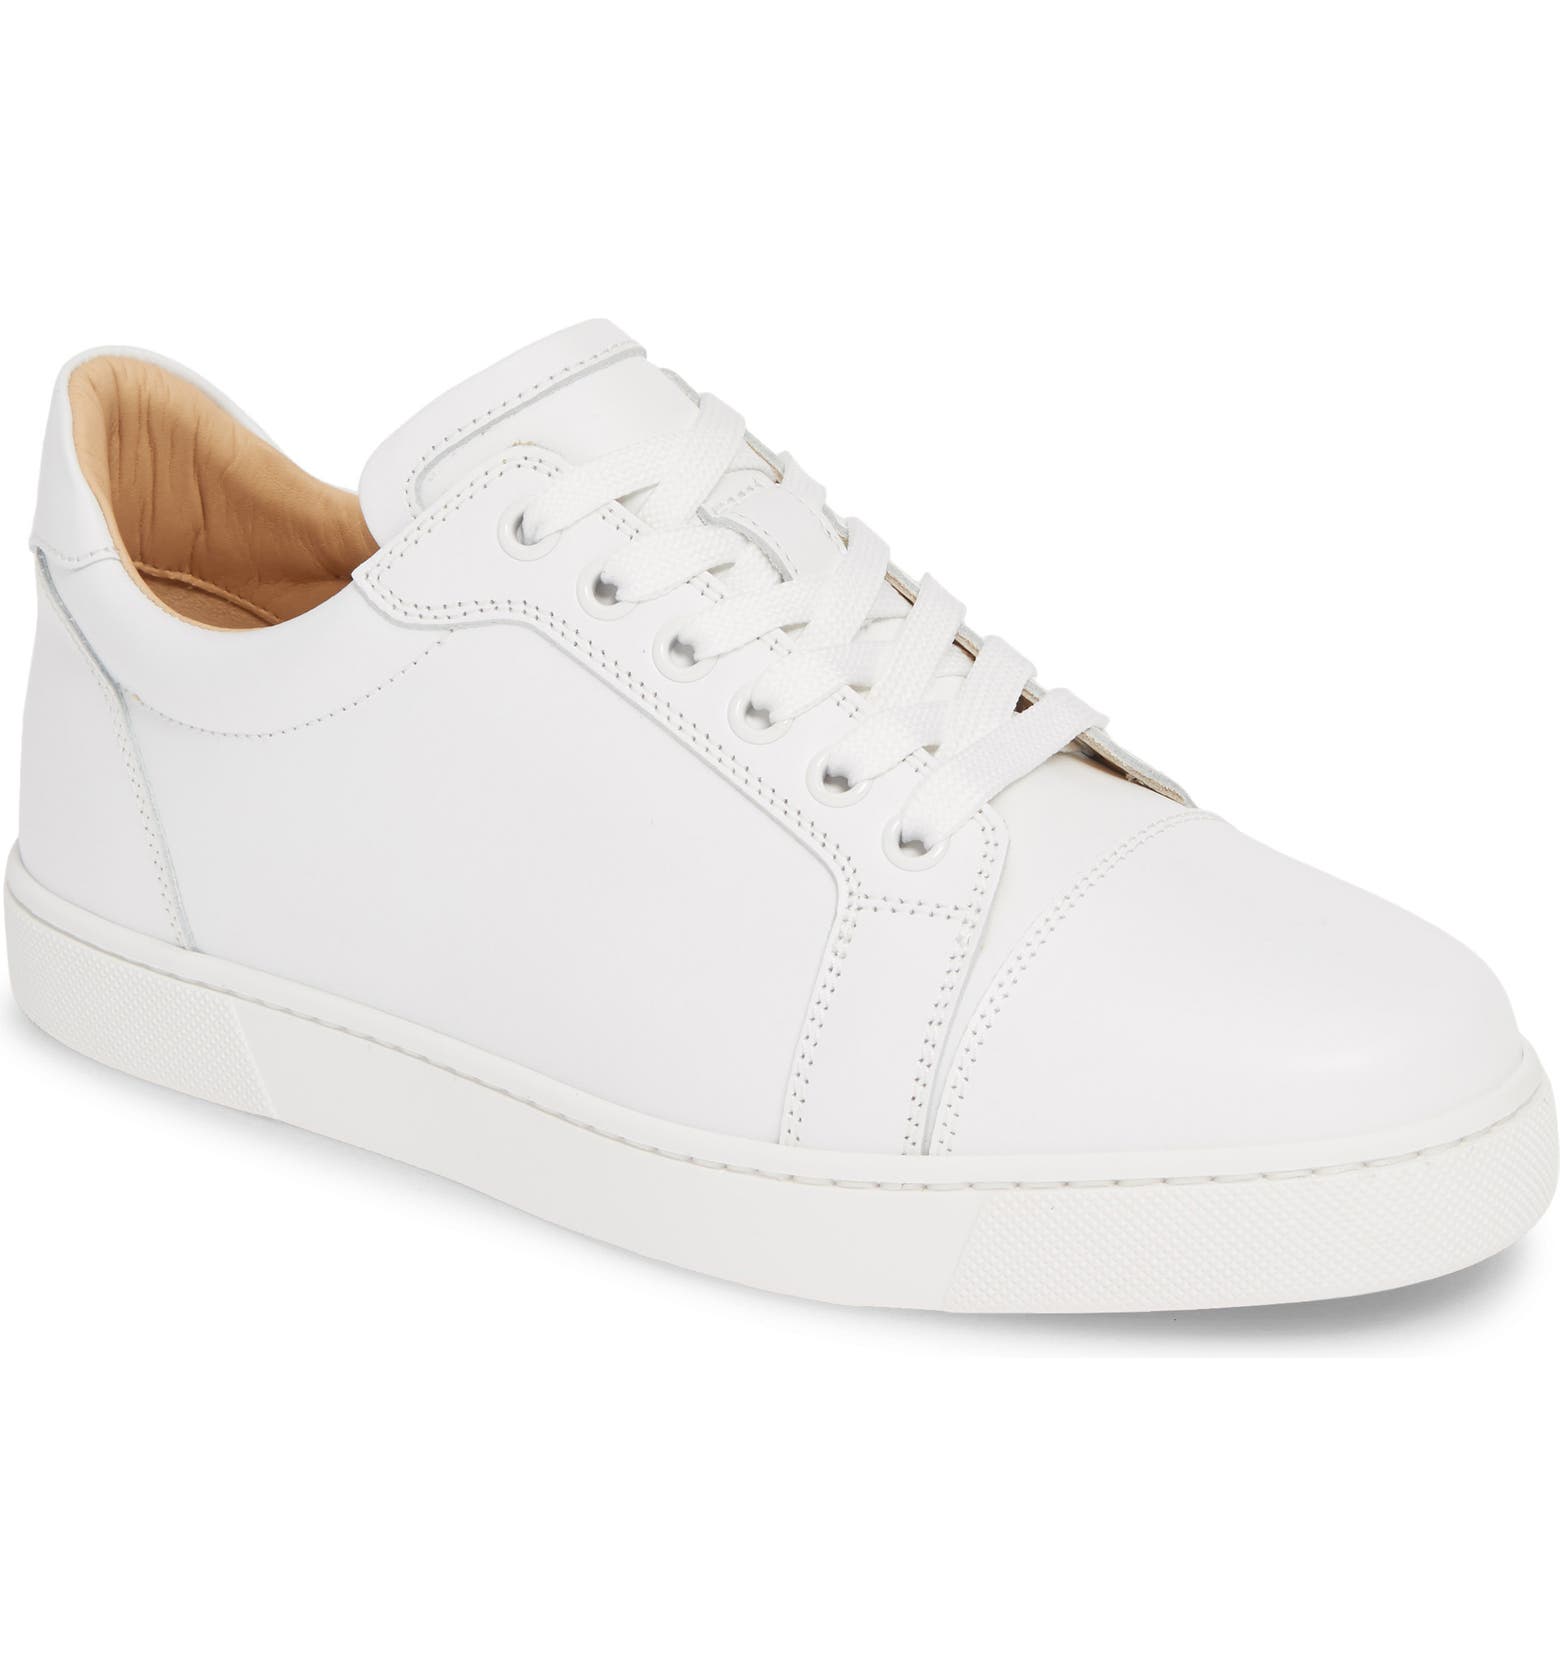 Christian Louboutin Vieira Lace-Up Sneaker | Nordstrom